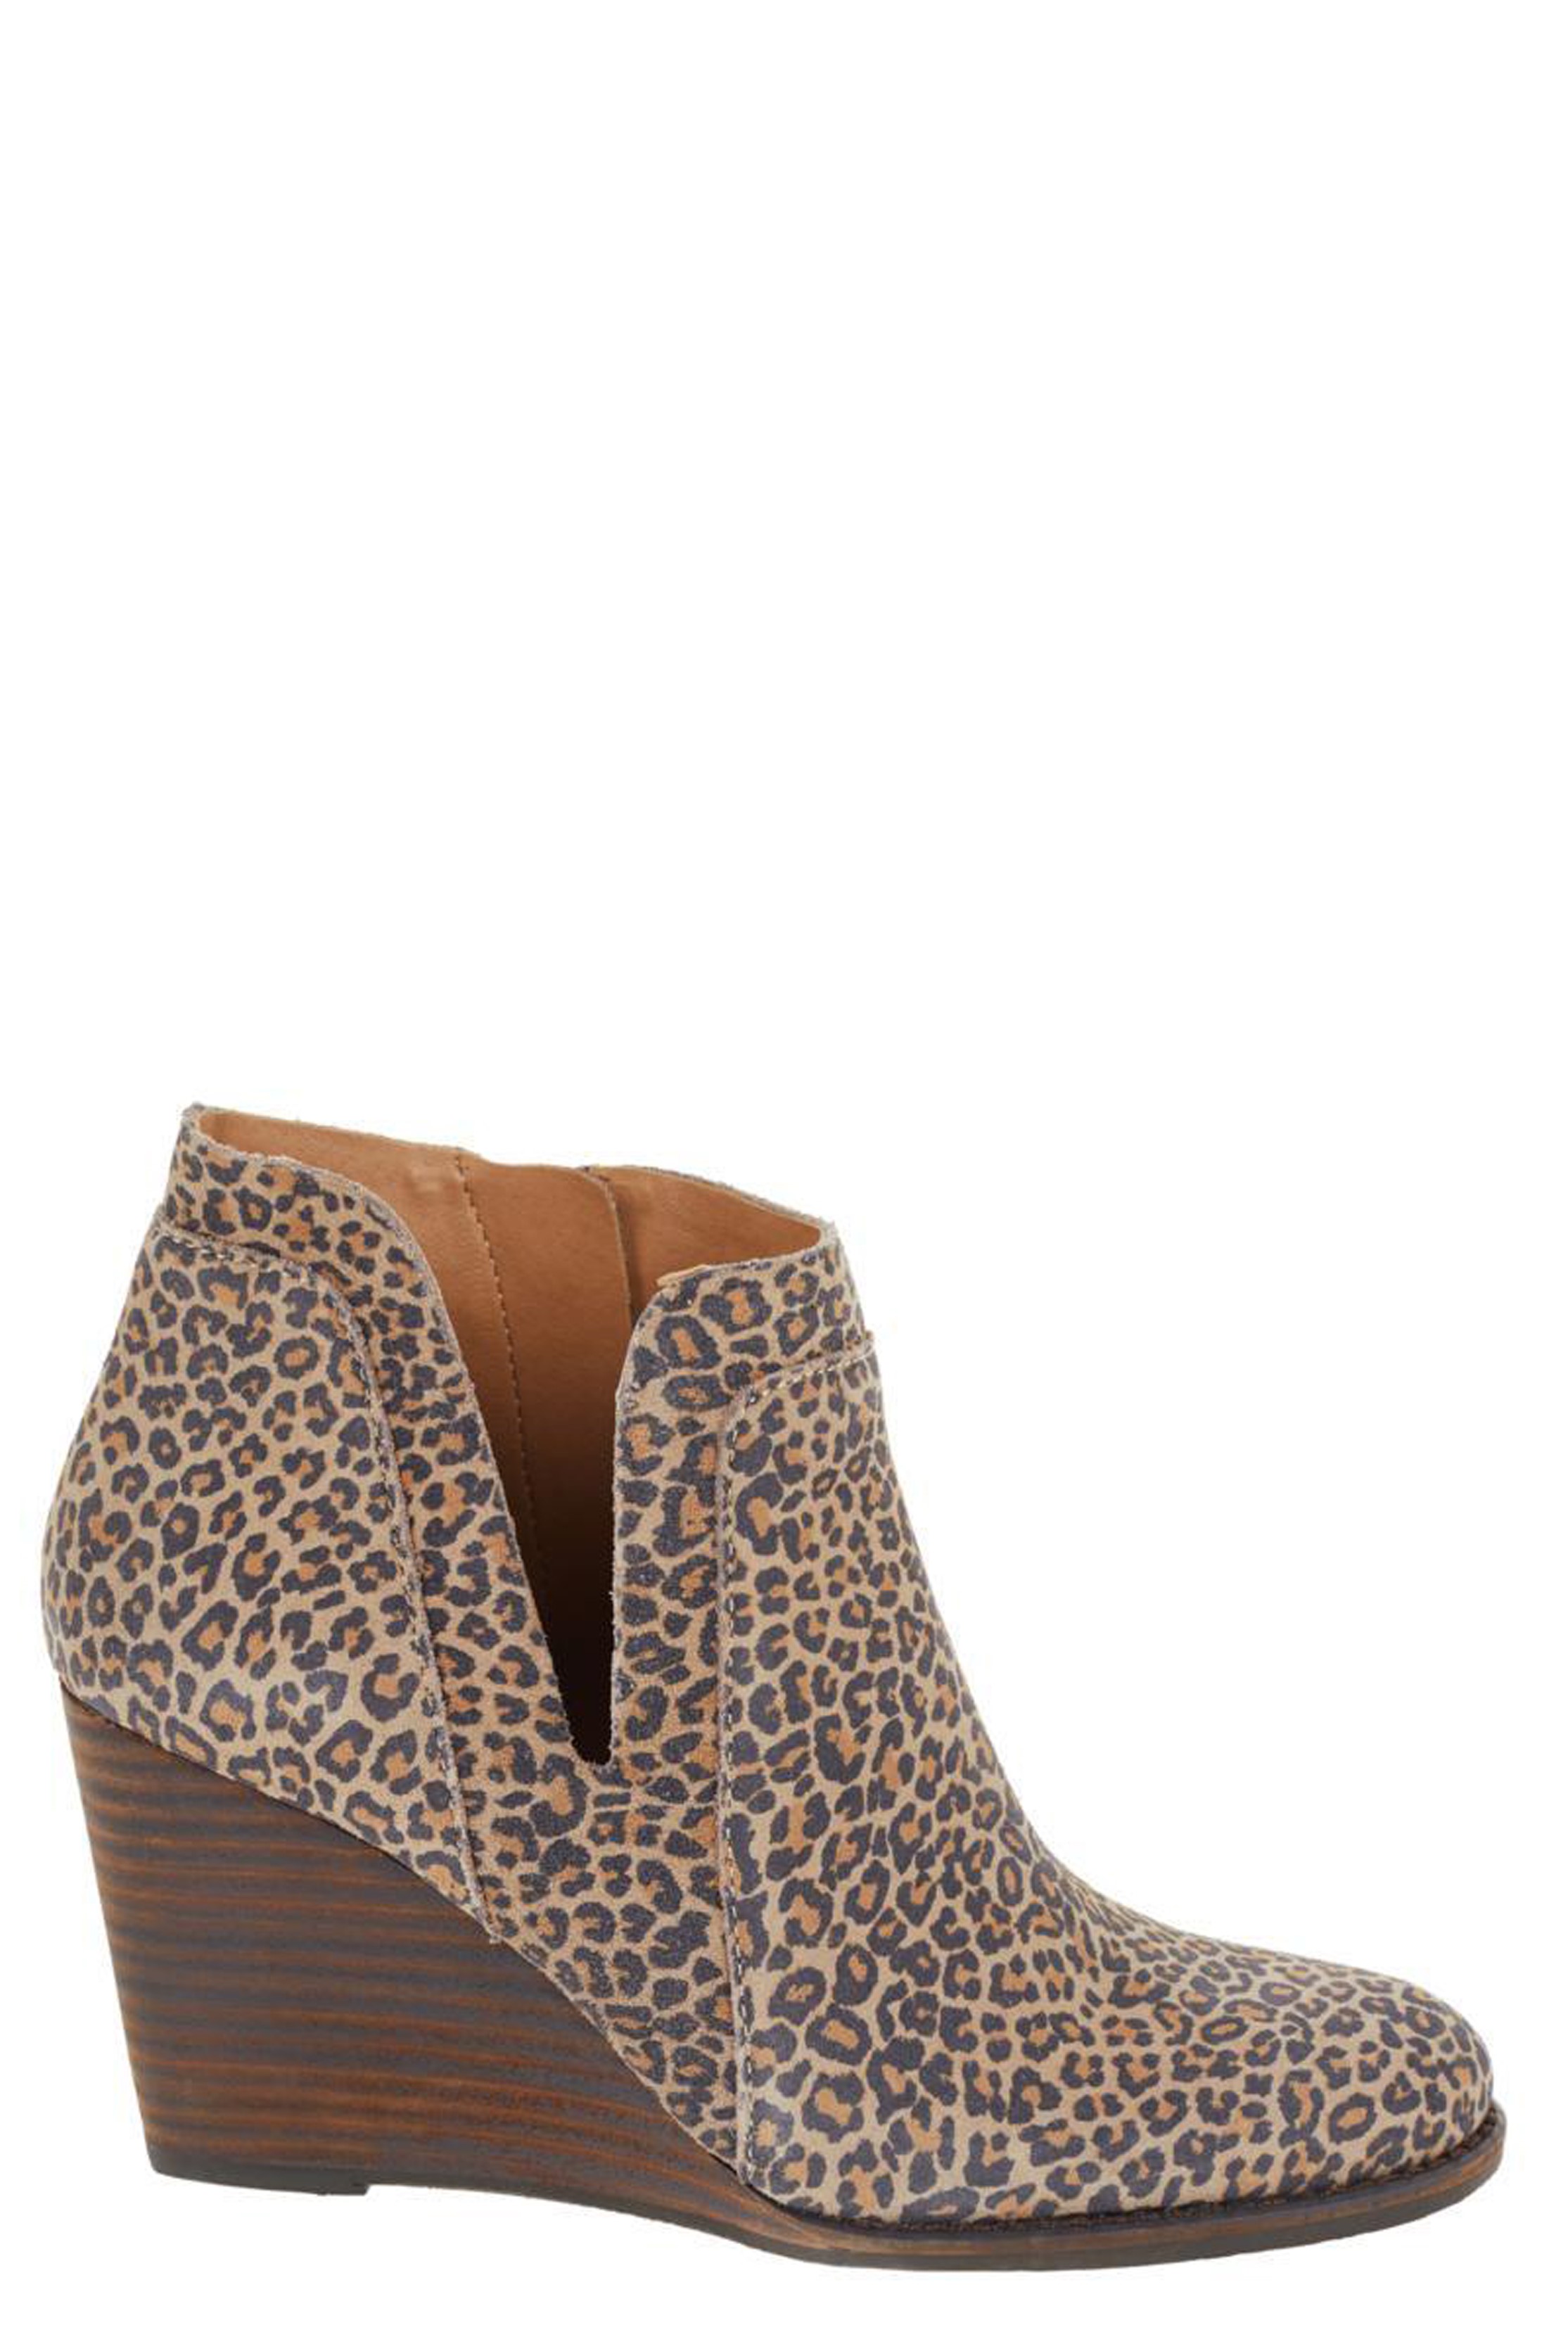 LUCKY BRAND YABBA Natural Leopard Wedge 